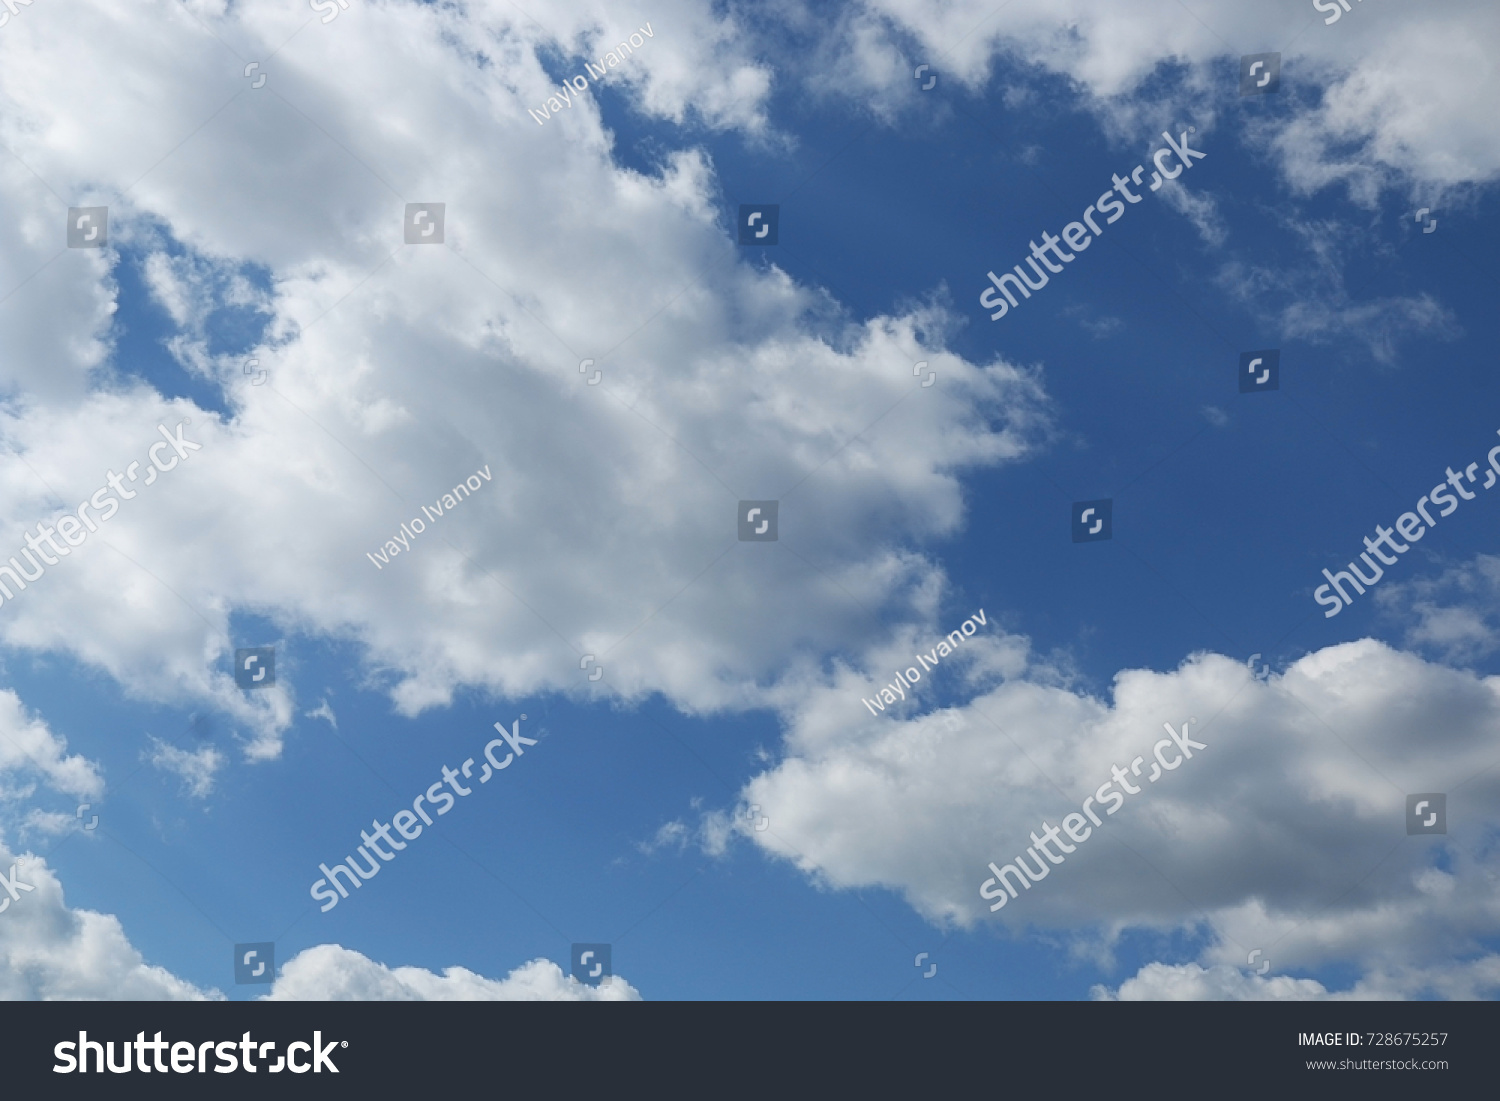 Blue sky with clouds background, blue sky with clouds #728675257